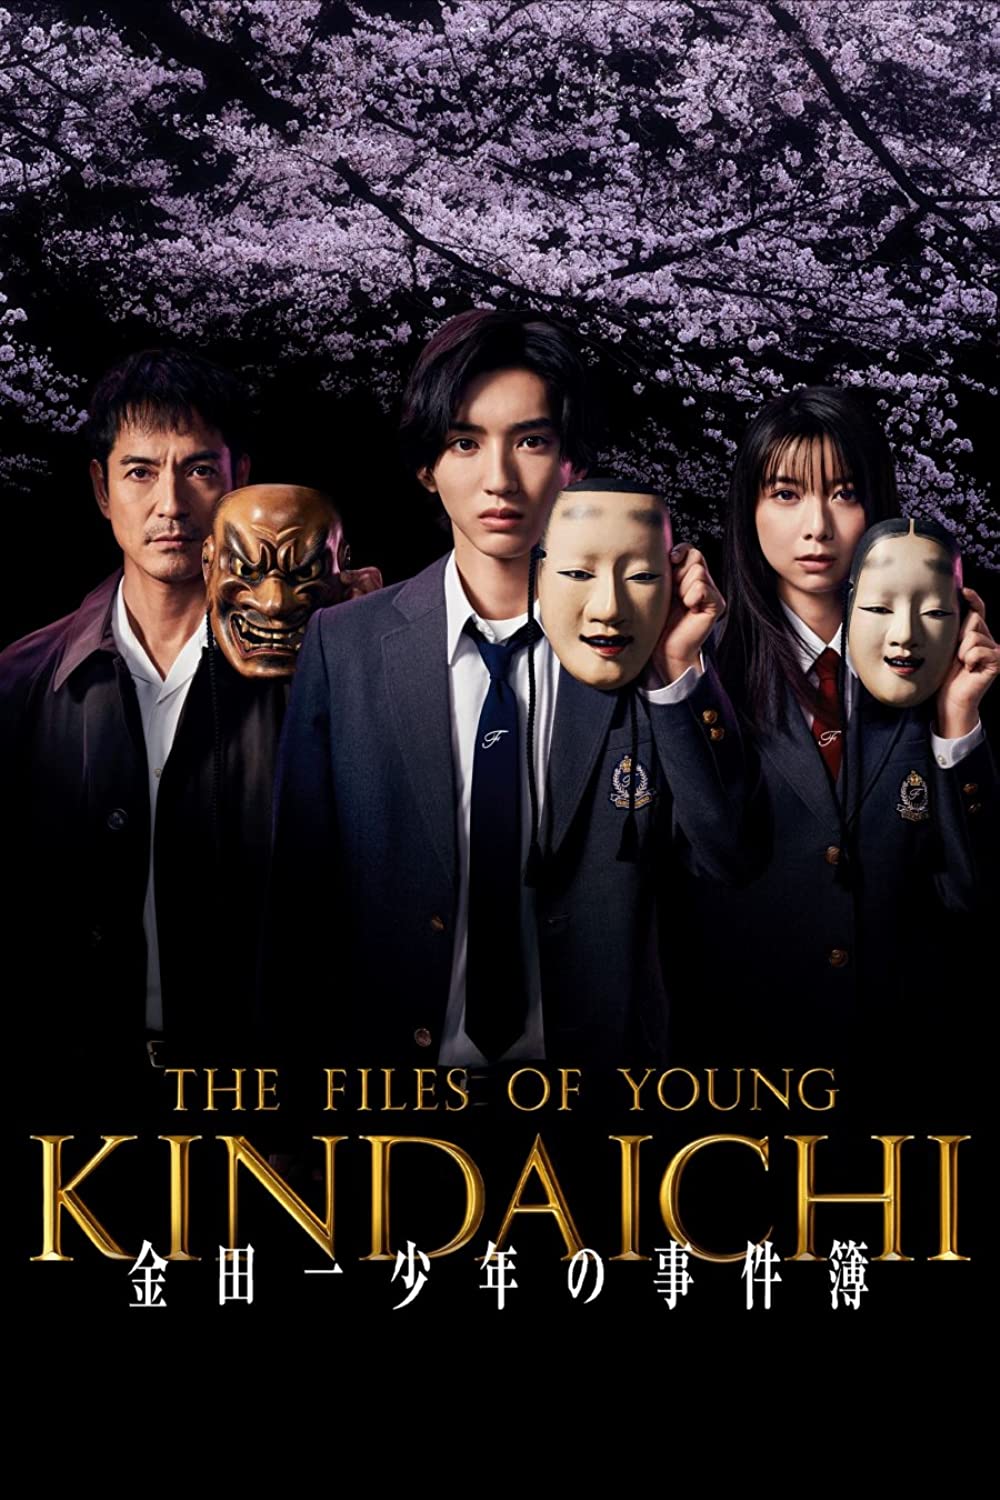 The Files of Young Kindaichi 2023 S01 Complete Hindi ORG Dual Audio 1080p HDRip MSub 12GB Download